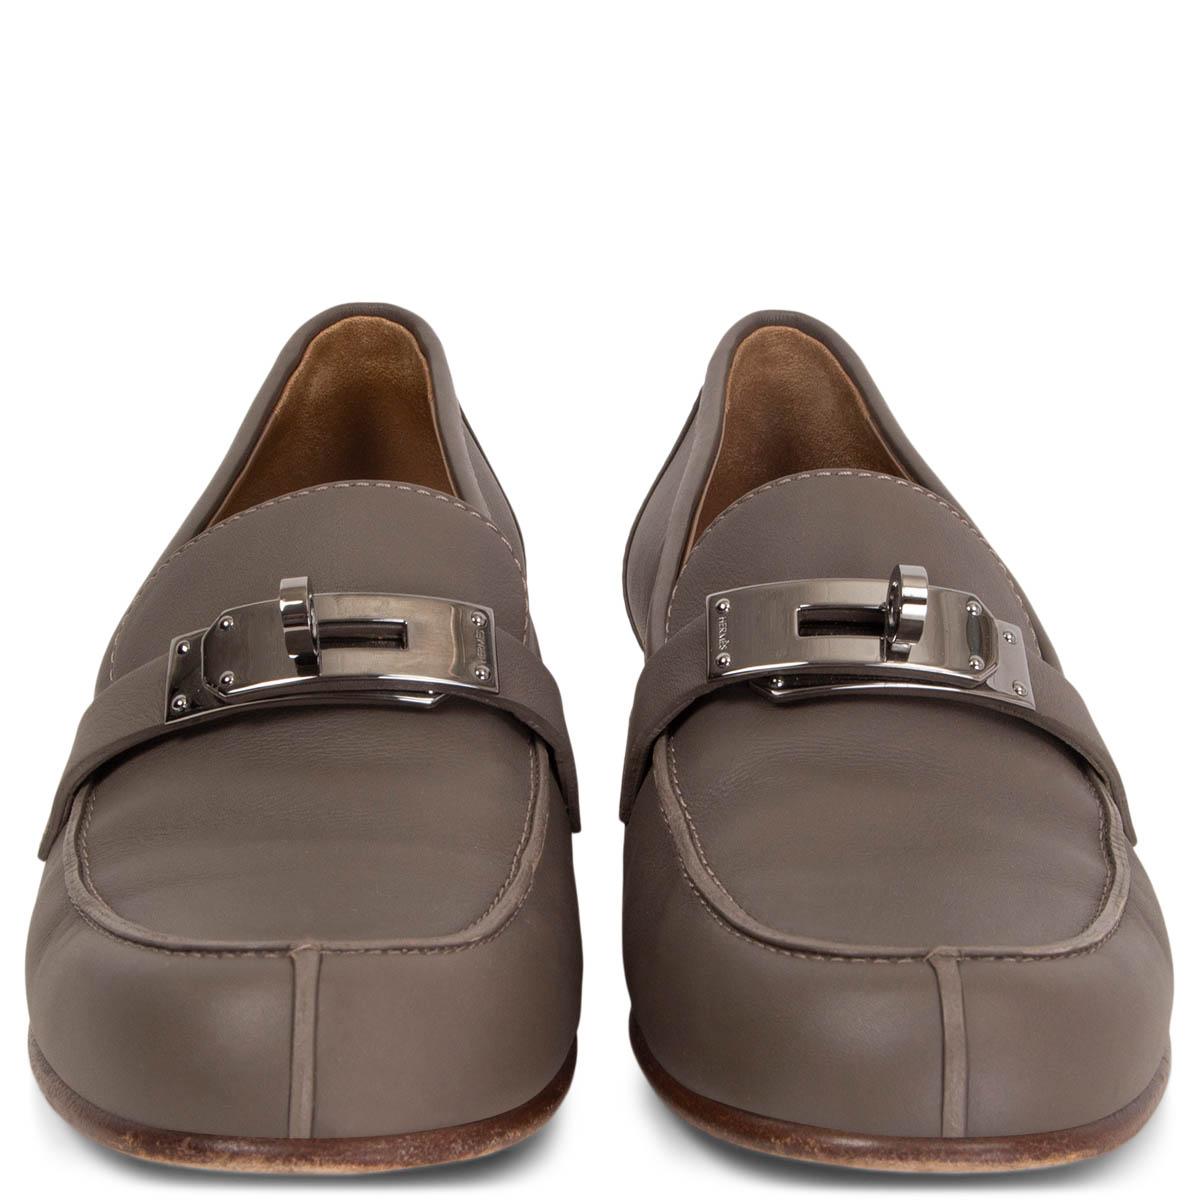 100% authentic Hermès Jules loafers in Etain grey leather and Ruthenium Kelly Lock buckle with a brown stacked heel. Have been worn and are in excellent condition. 

Measurements
Imprinted Size	38
Shoe Size	38
Inside Sole	25cm (9.8in)
Width	7.5cm